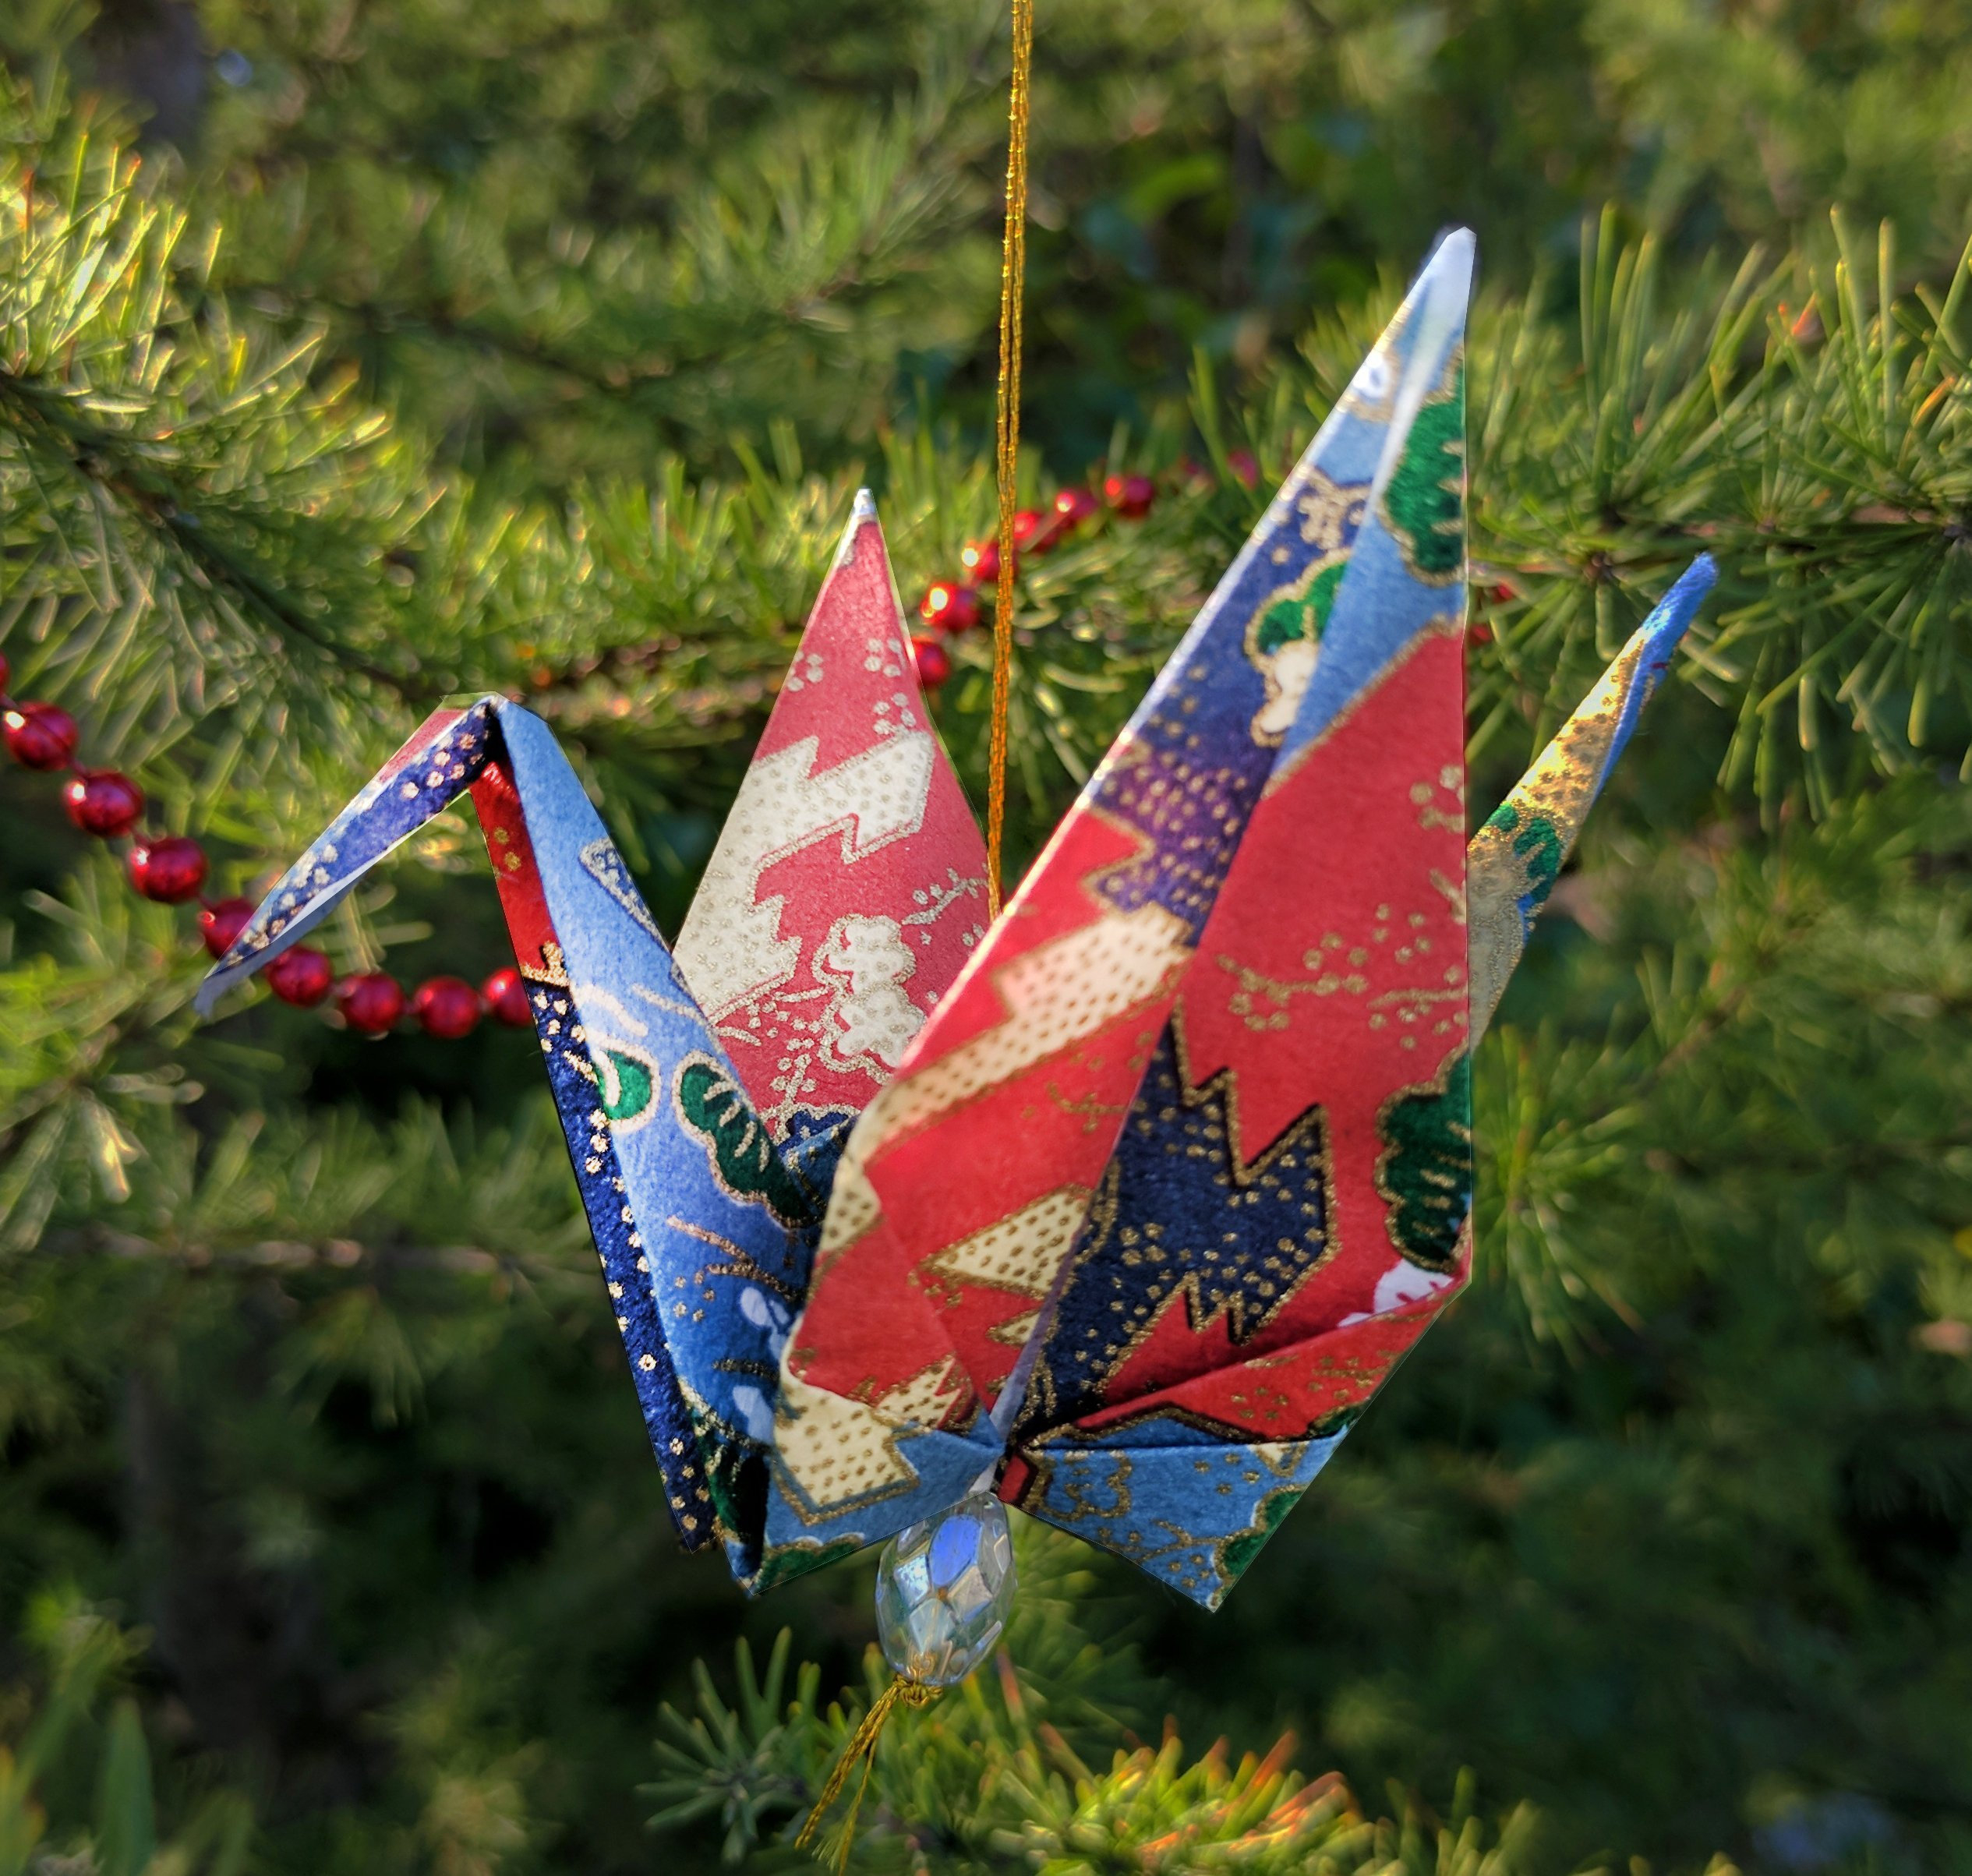 Origami Crane Ornament Christmas Origami Christmas Ornament Origami Crane Christmas Ornament Bird Ornament Exquisite Japanese Paper In Red Blue And Beige A4hgxm